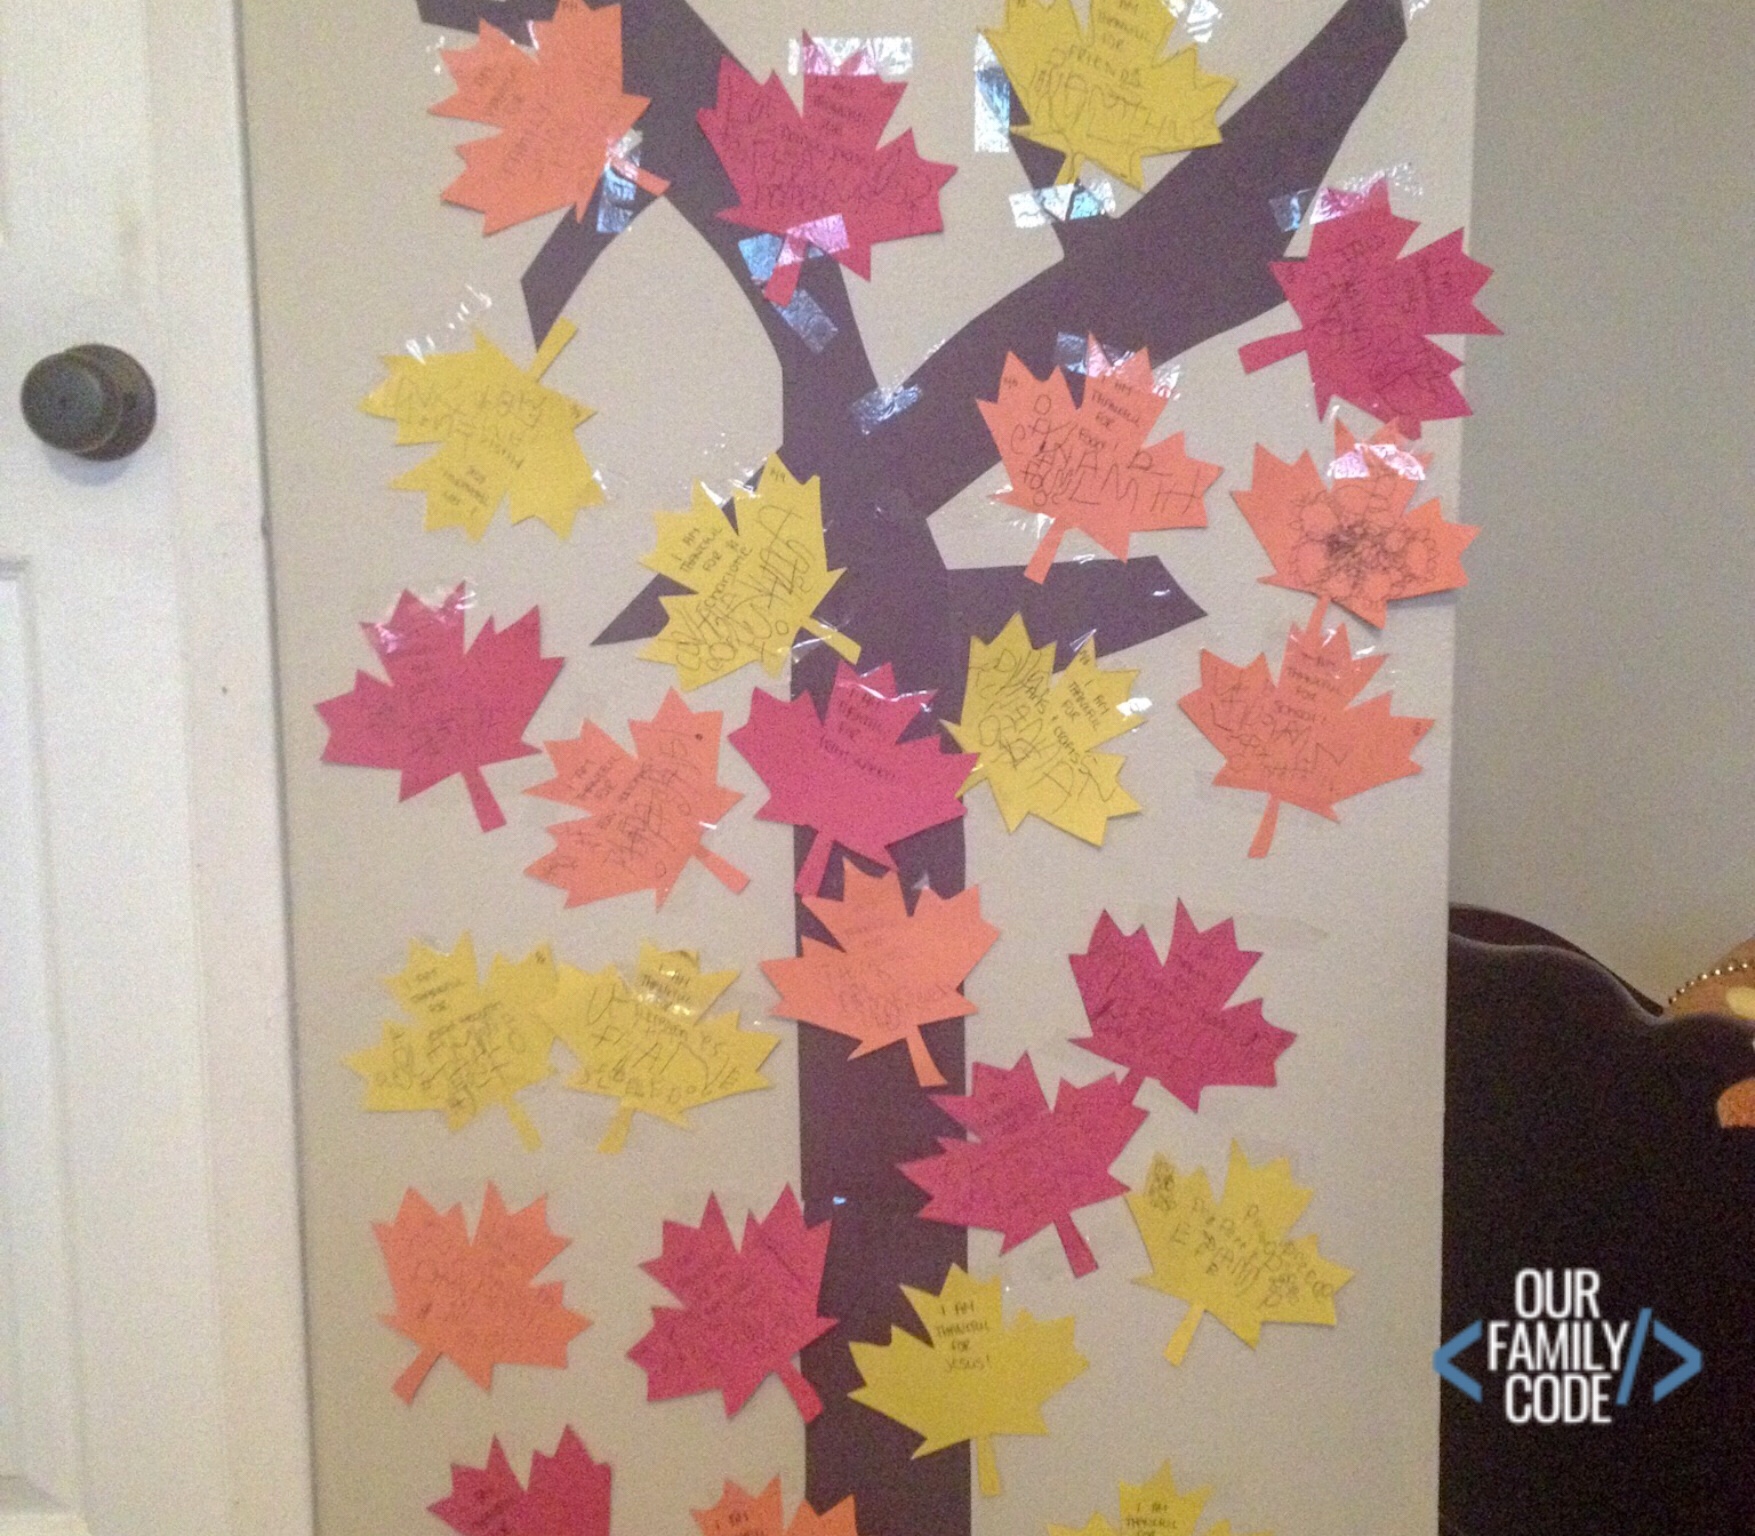 A picture of a Thankful tree filled with leaves with things that kids are thankful for.